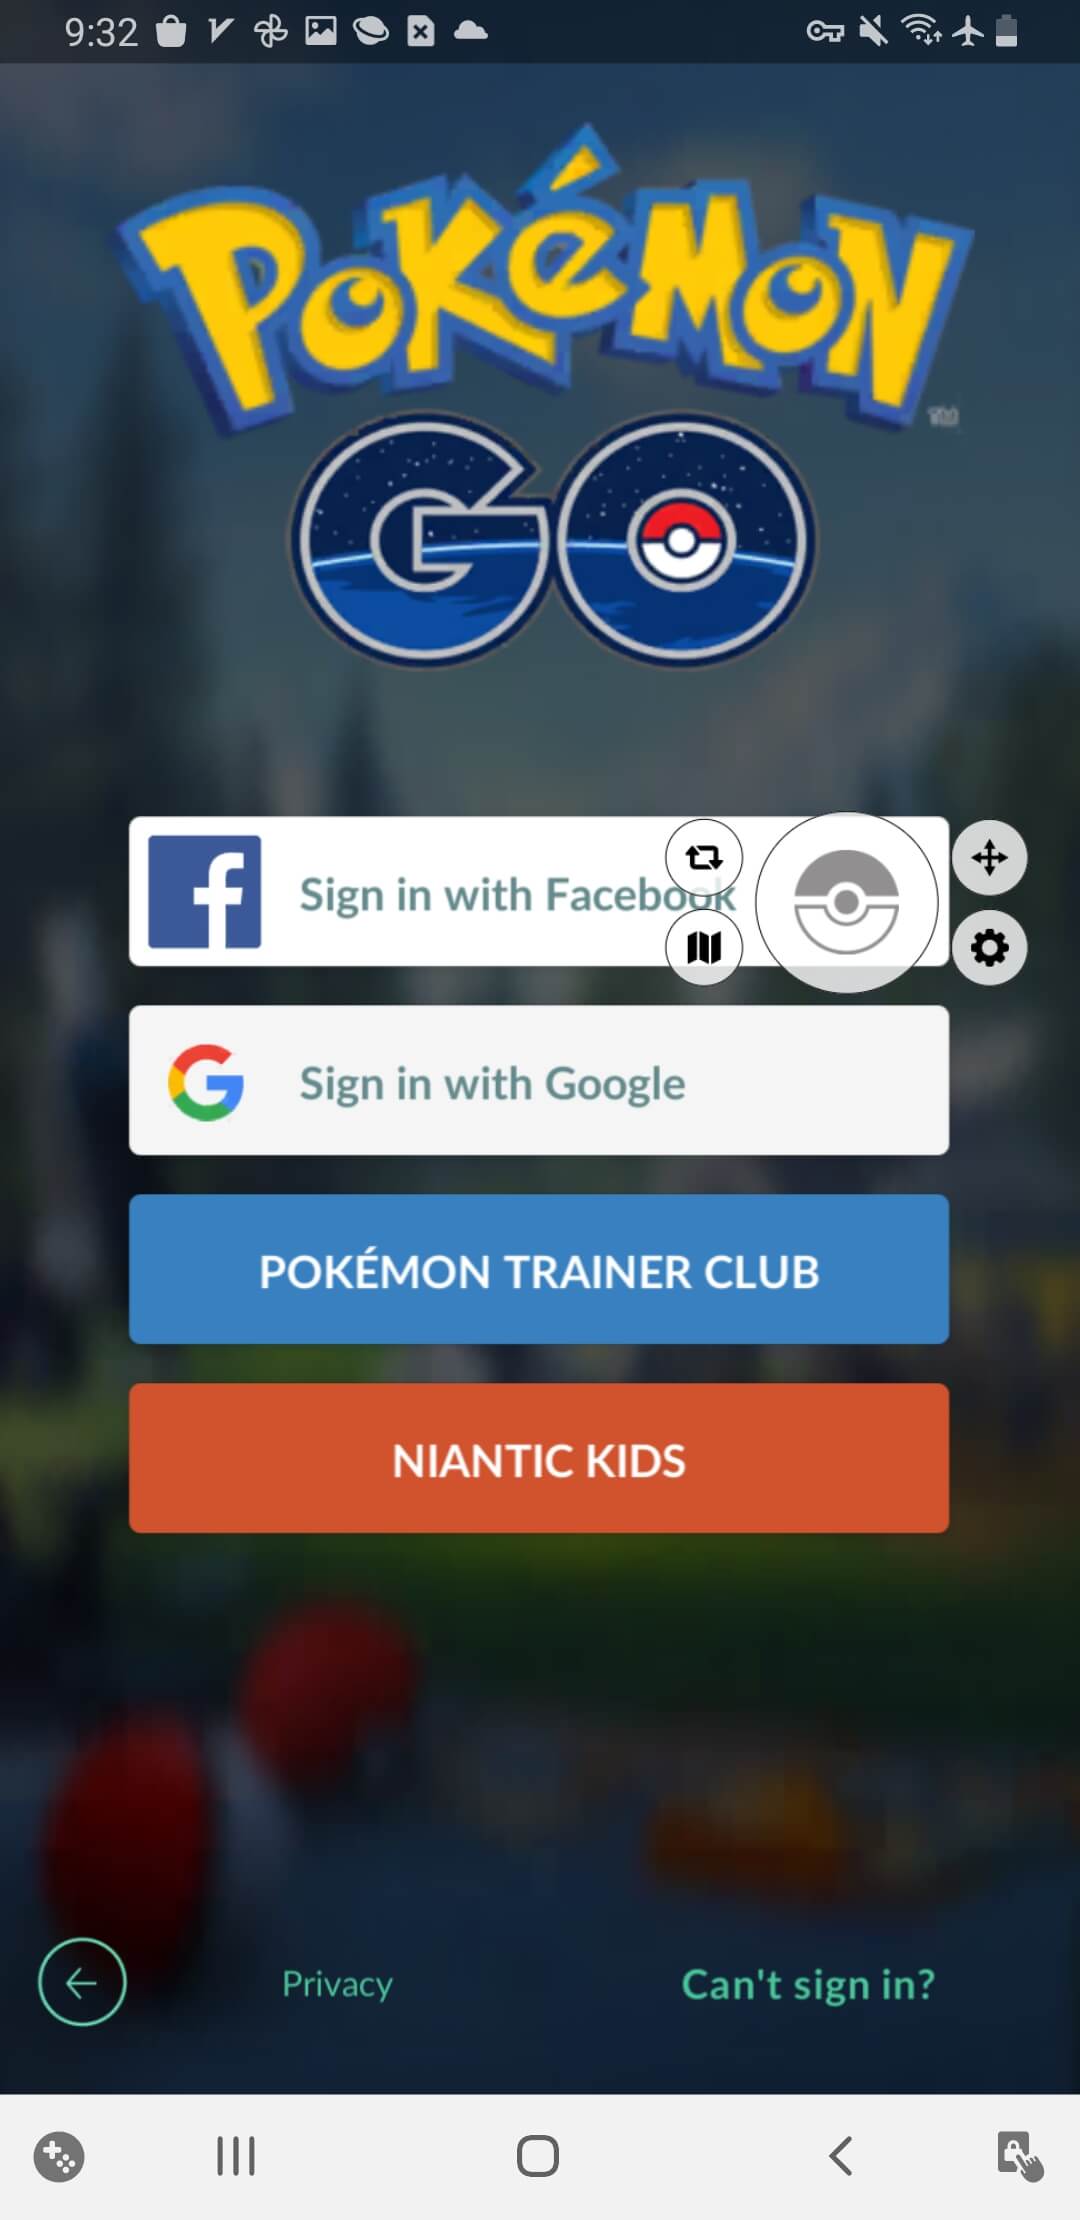 Pokemon Tutorial - How to Sign Up For A Pokemon Trainer Club Account 